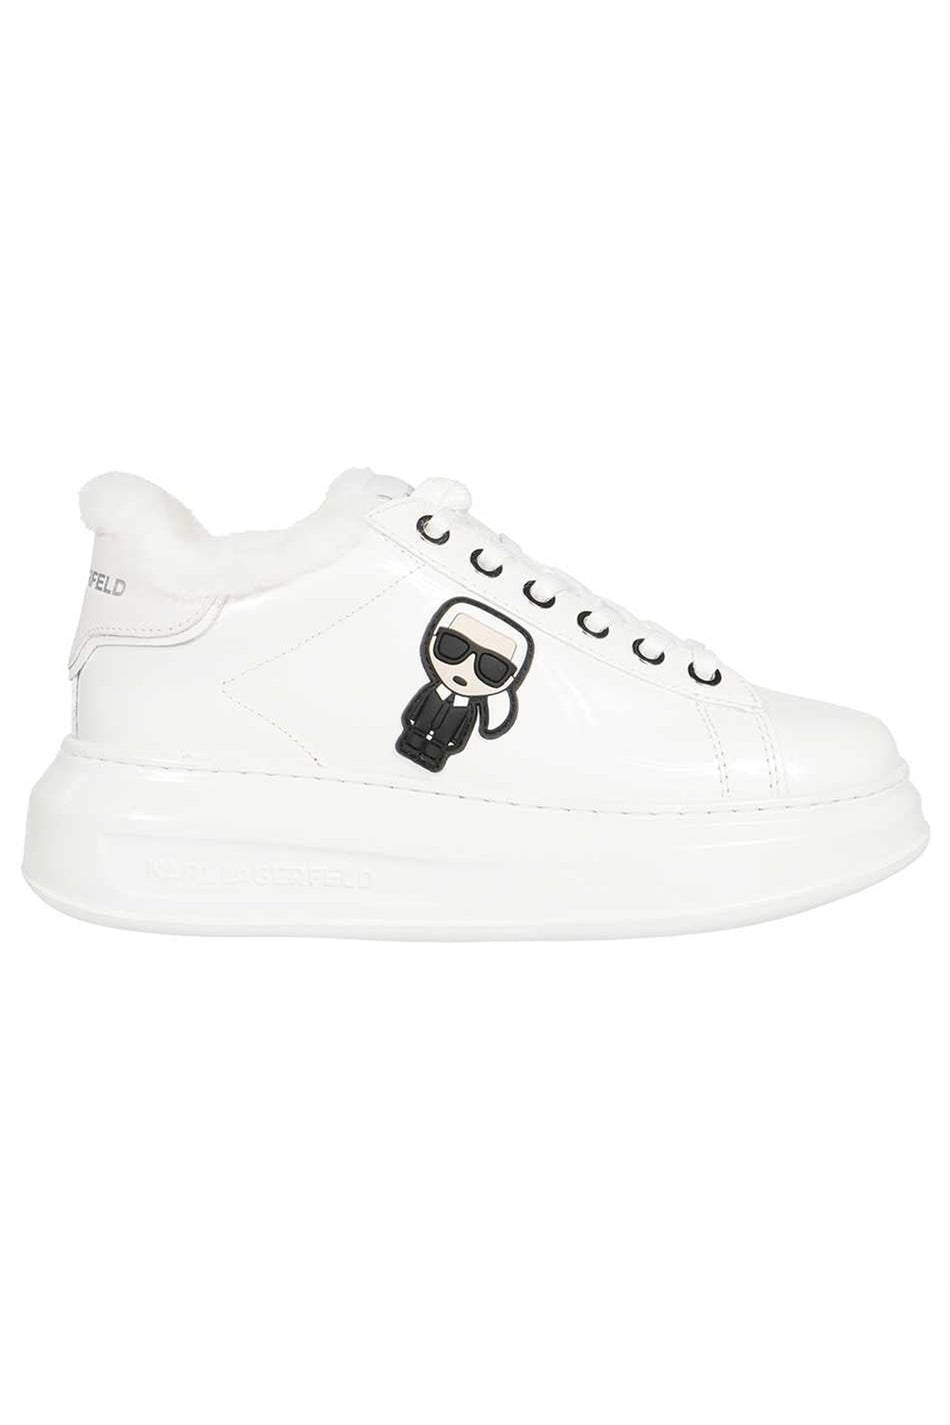 Low-top sneakers-Karl Lagerfeld-OUTLET-SALE-35-ARCHIVIST